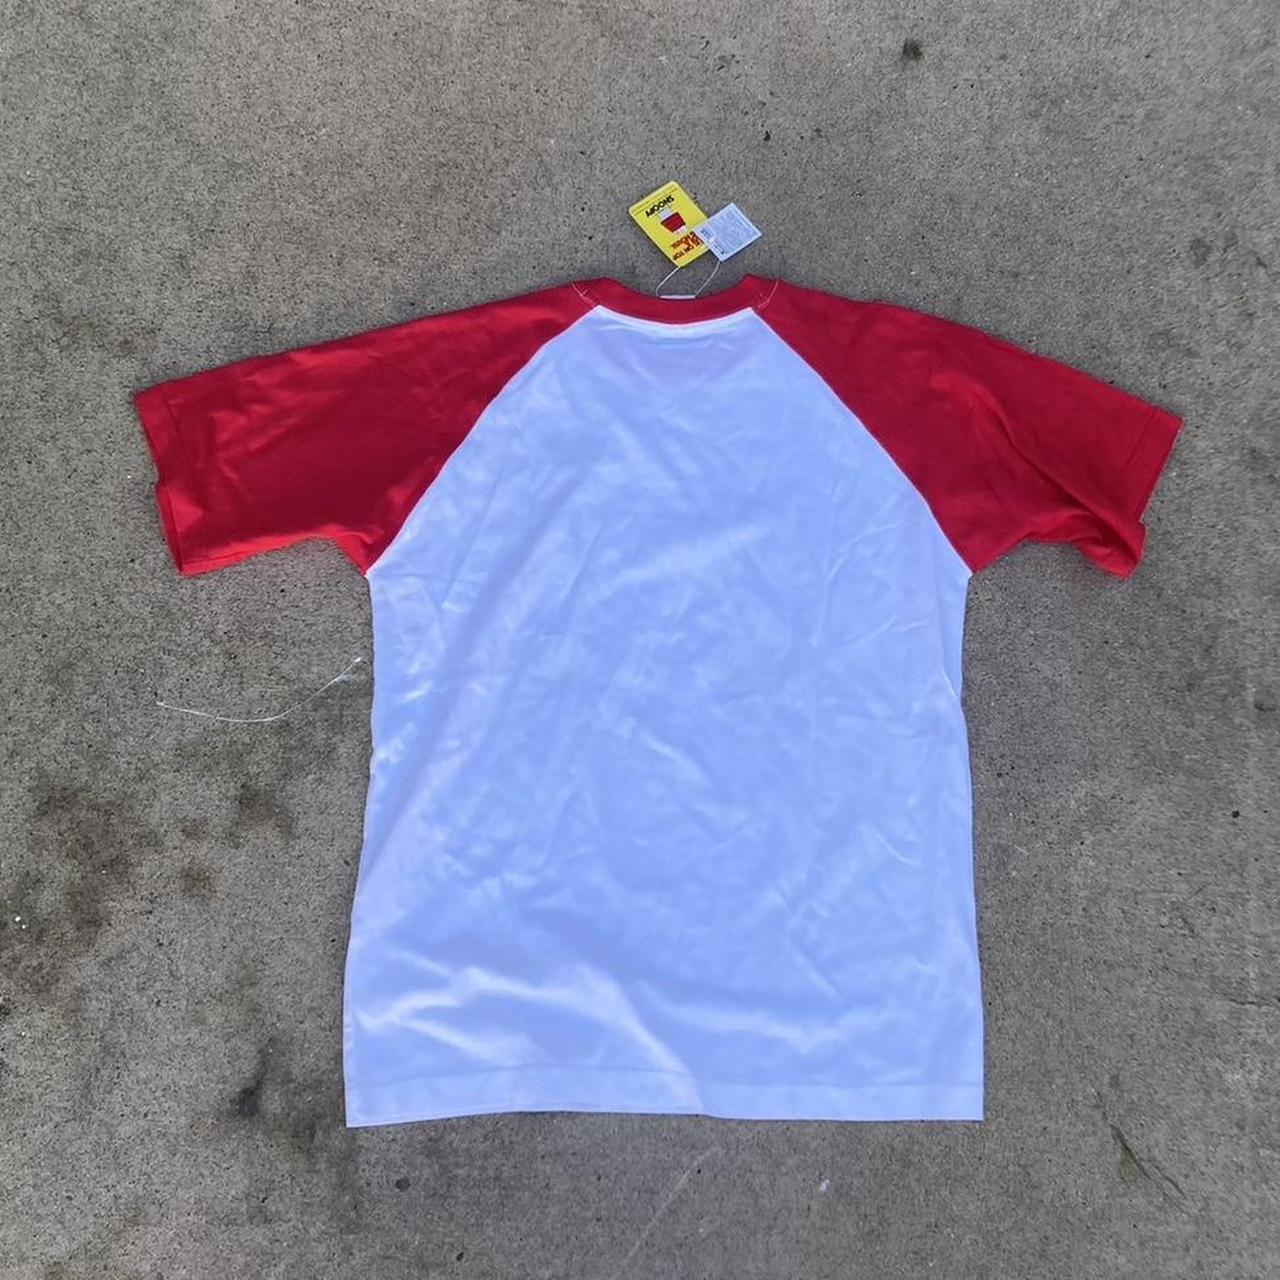 Peanuts Men's White and Red T-shirt (4)